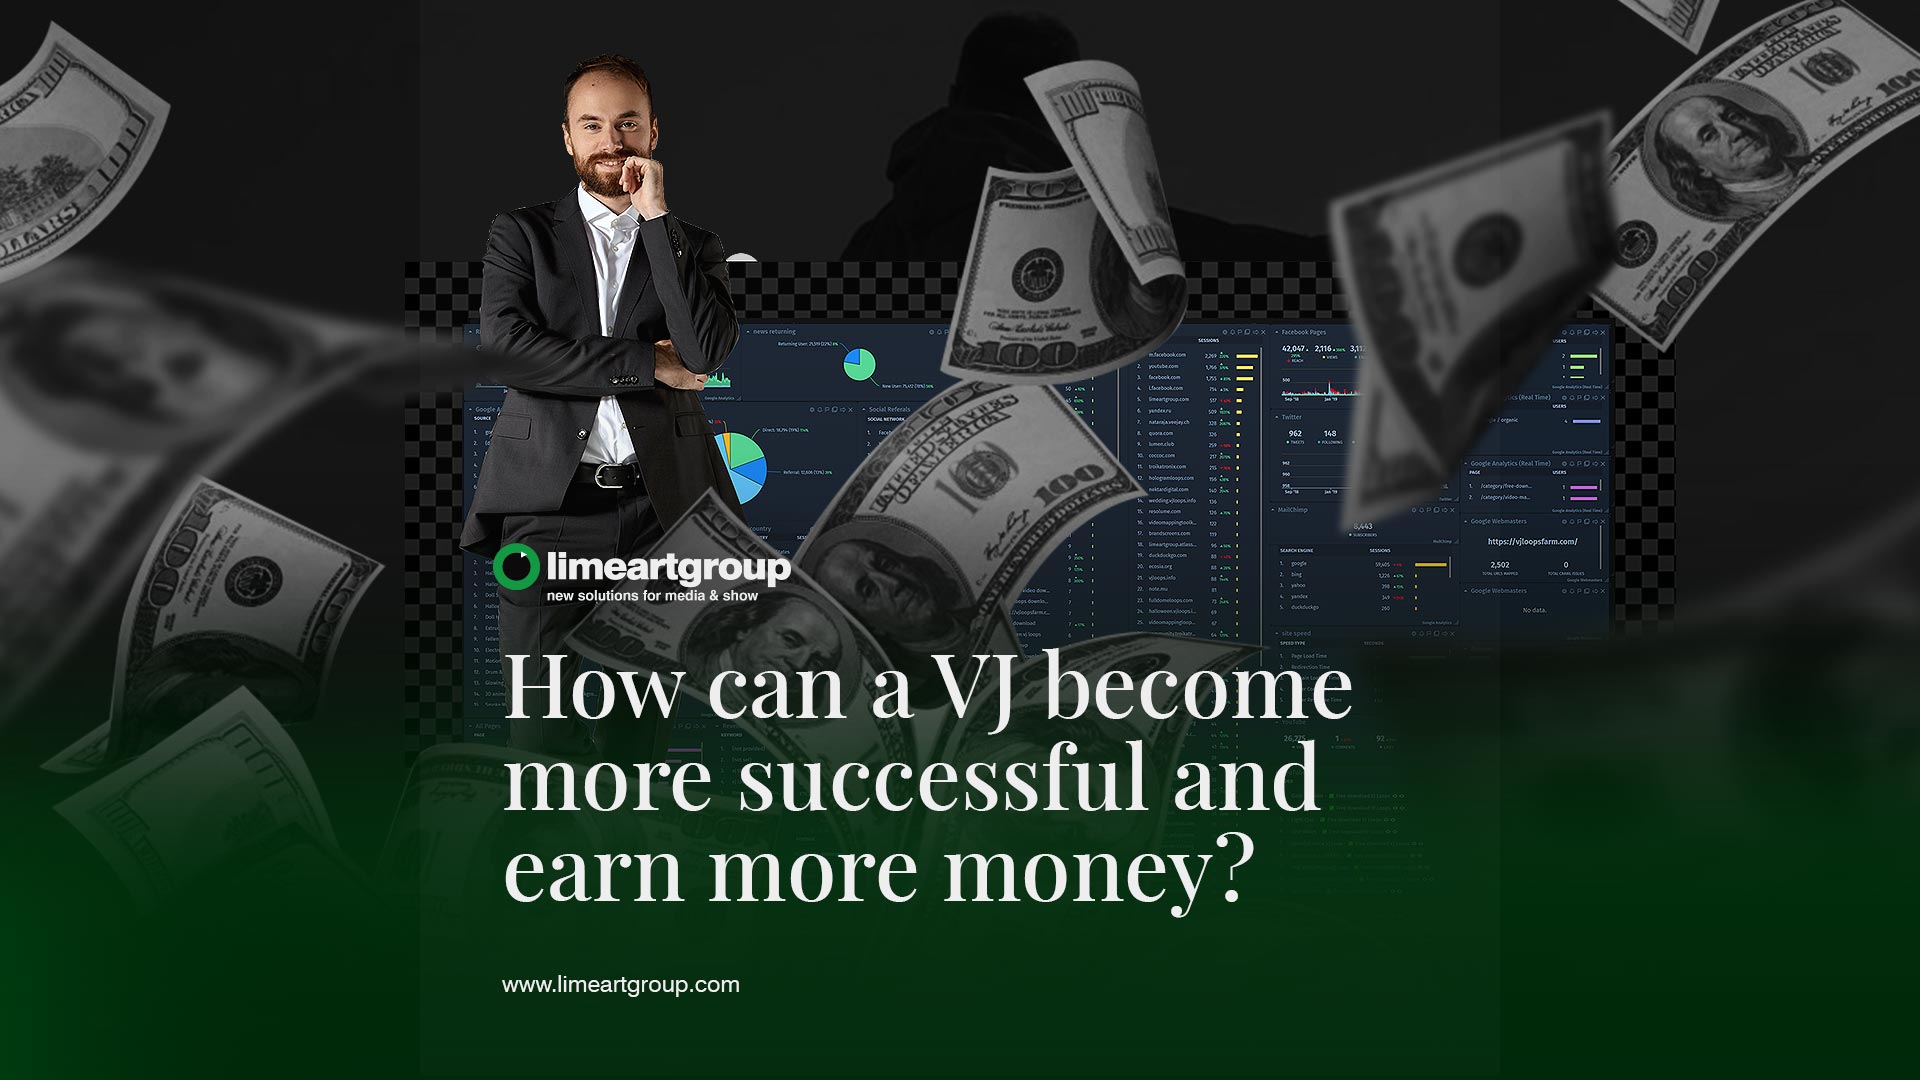 How can a VJ become more successful and earn more money?